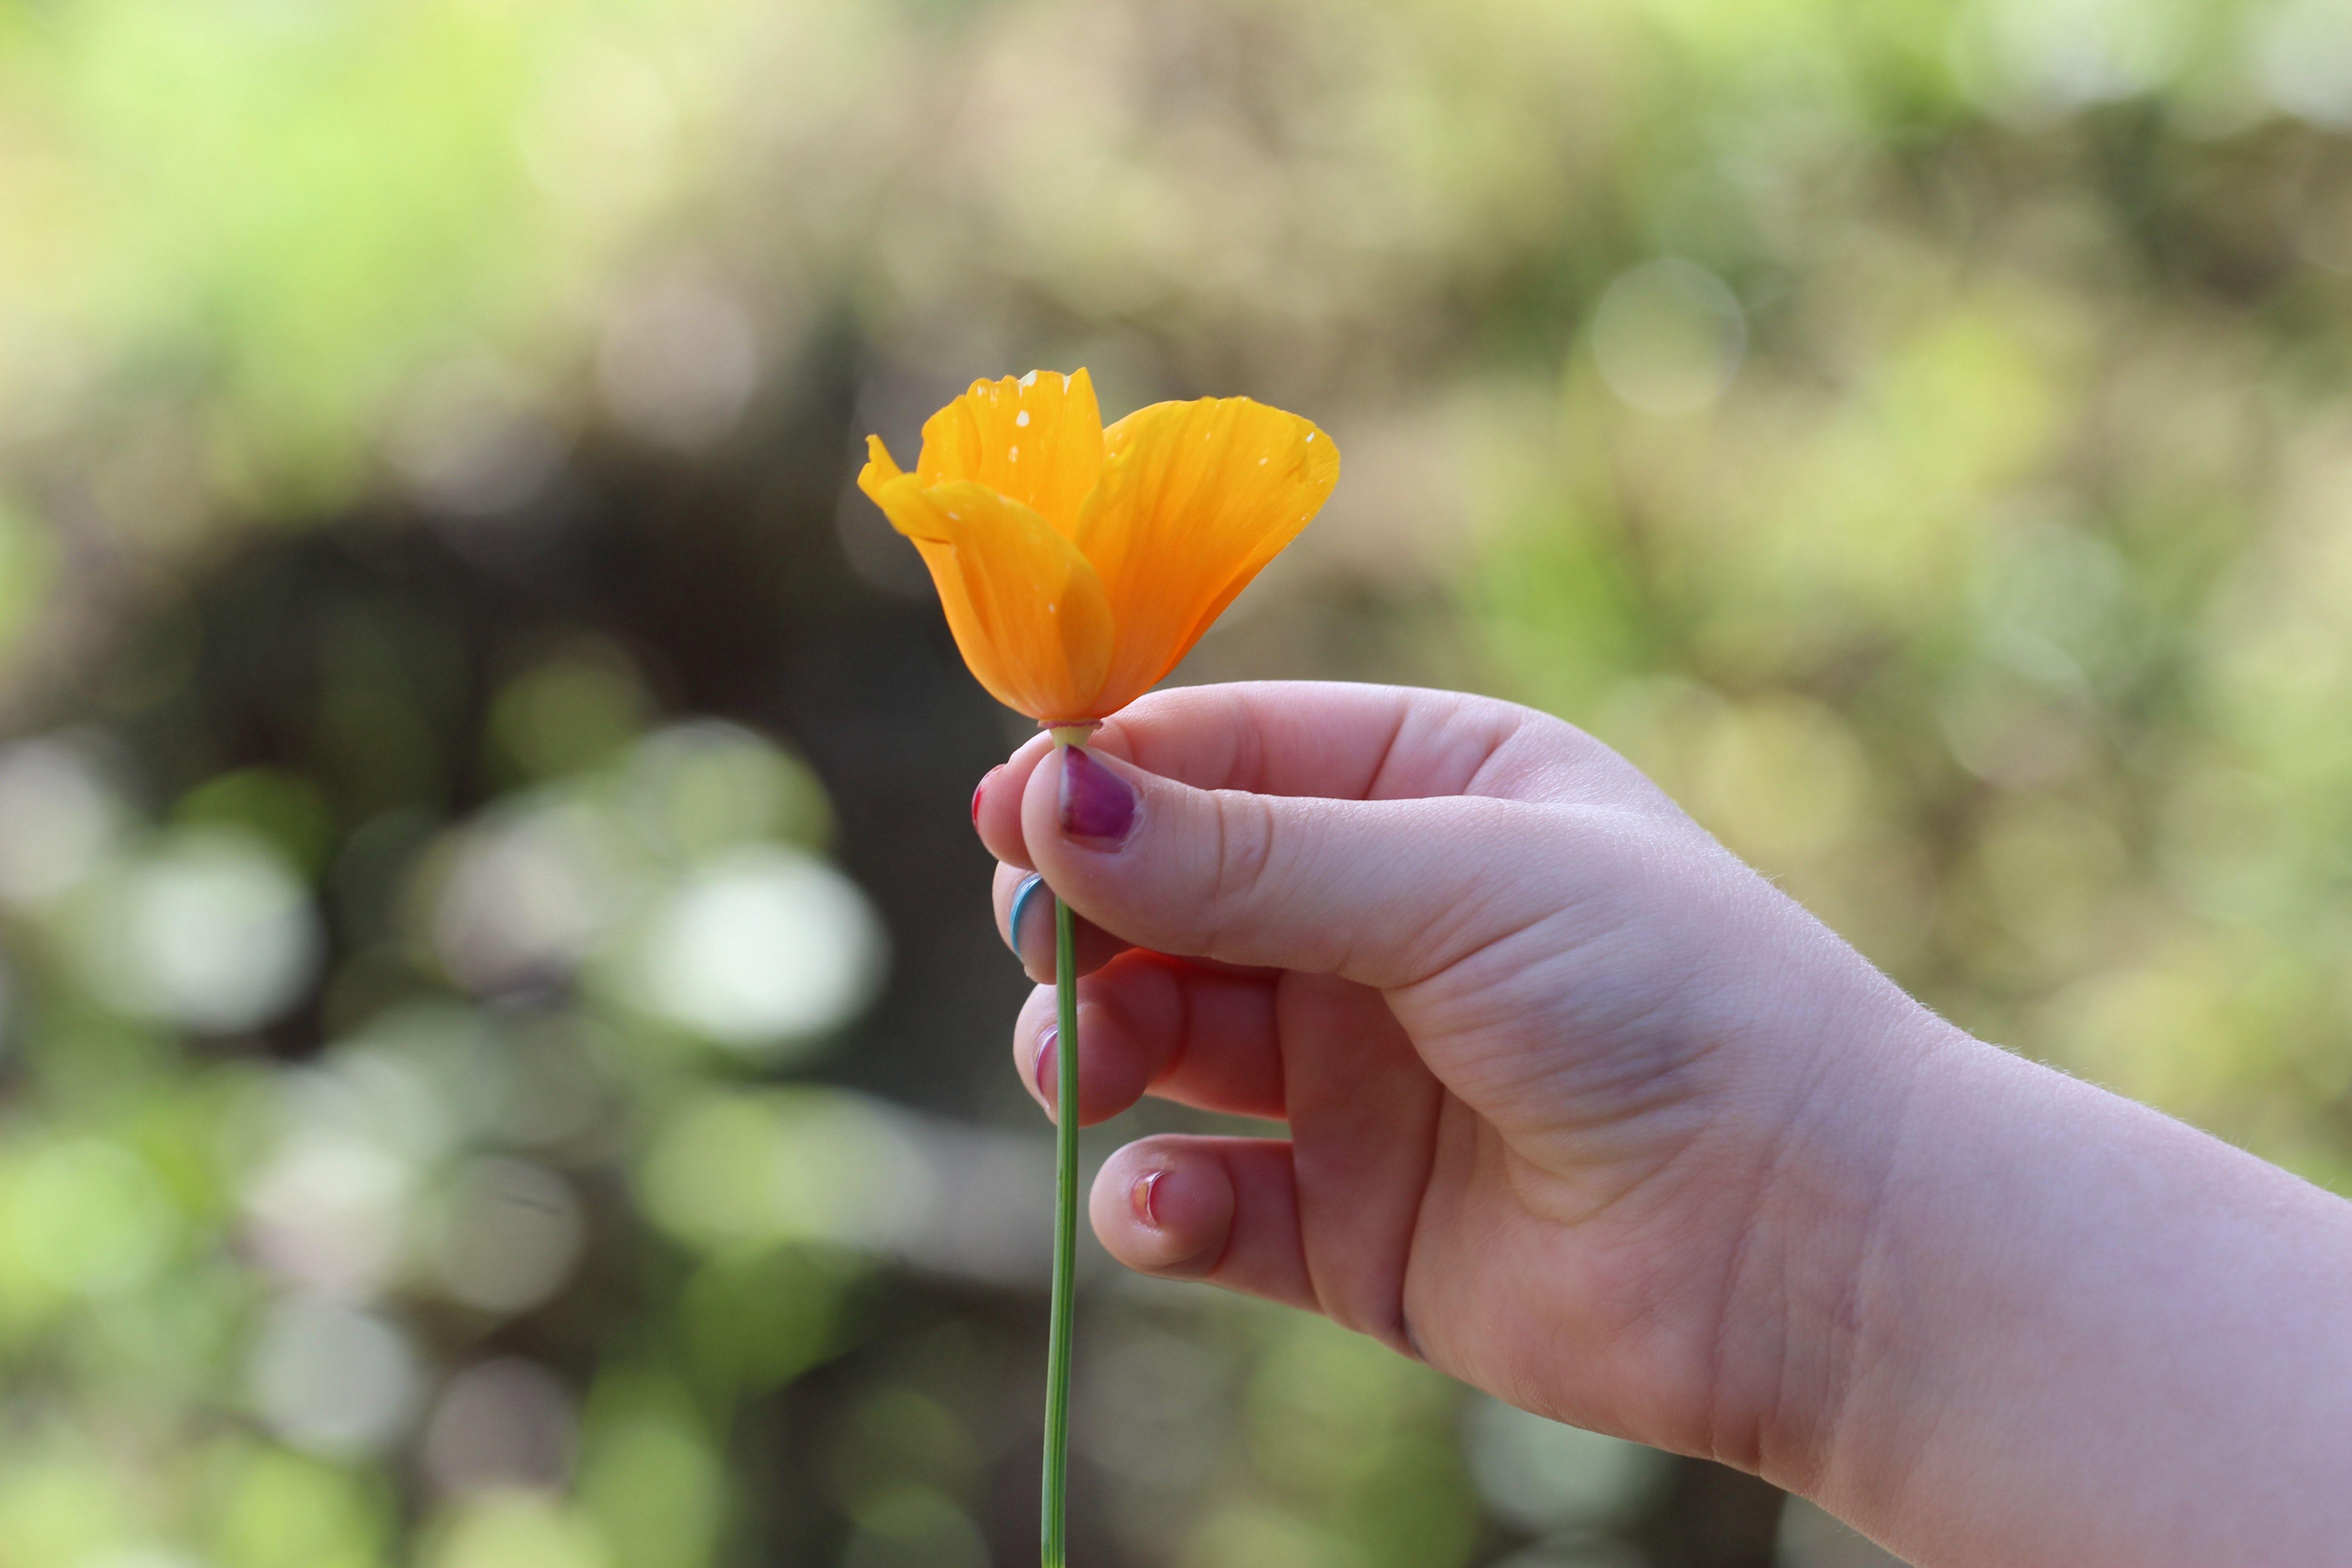 Hand Holding Flower Logo - Right Human Hand Holding a Yellow Petaled Flower · Free Stock Photo